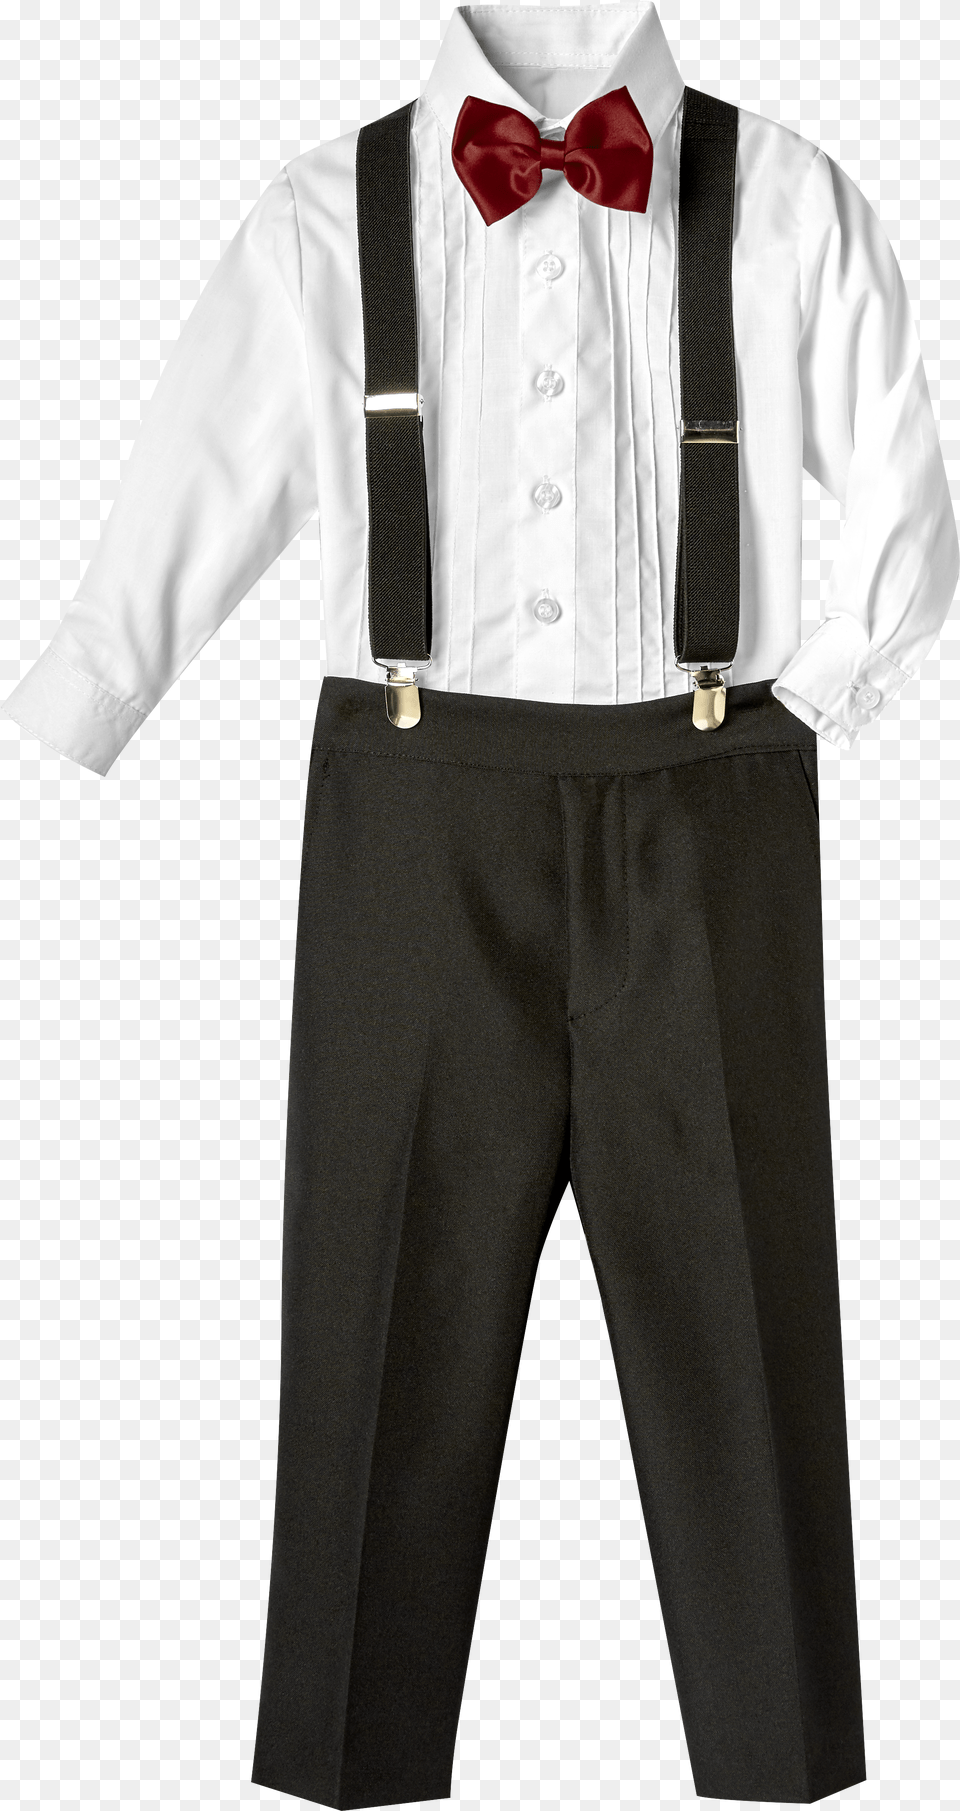 Black Shirt With Red Bow Tie And Suspenders Solid Png Image